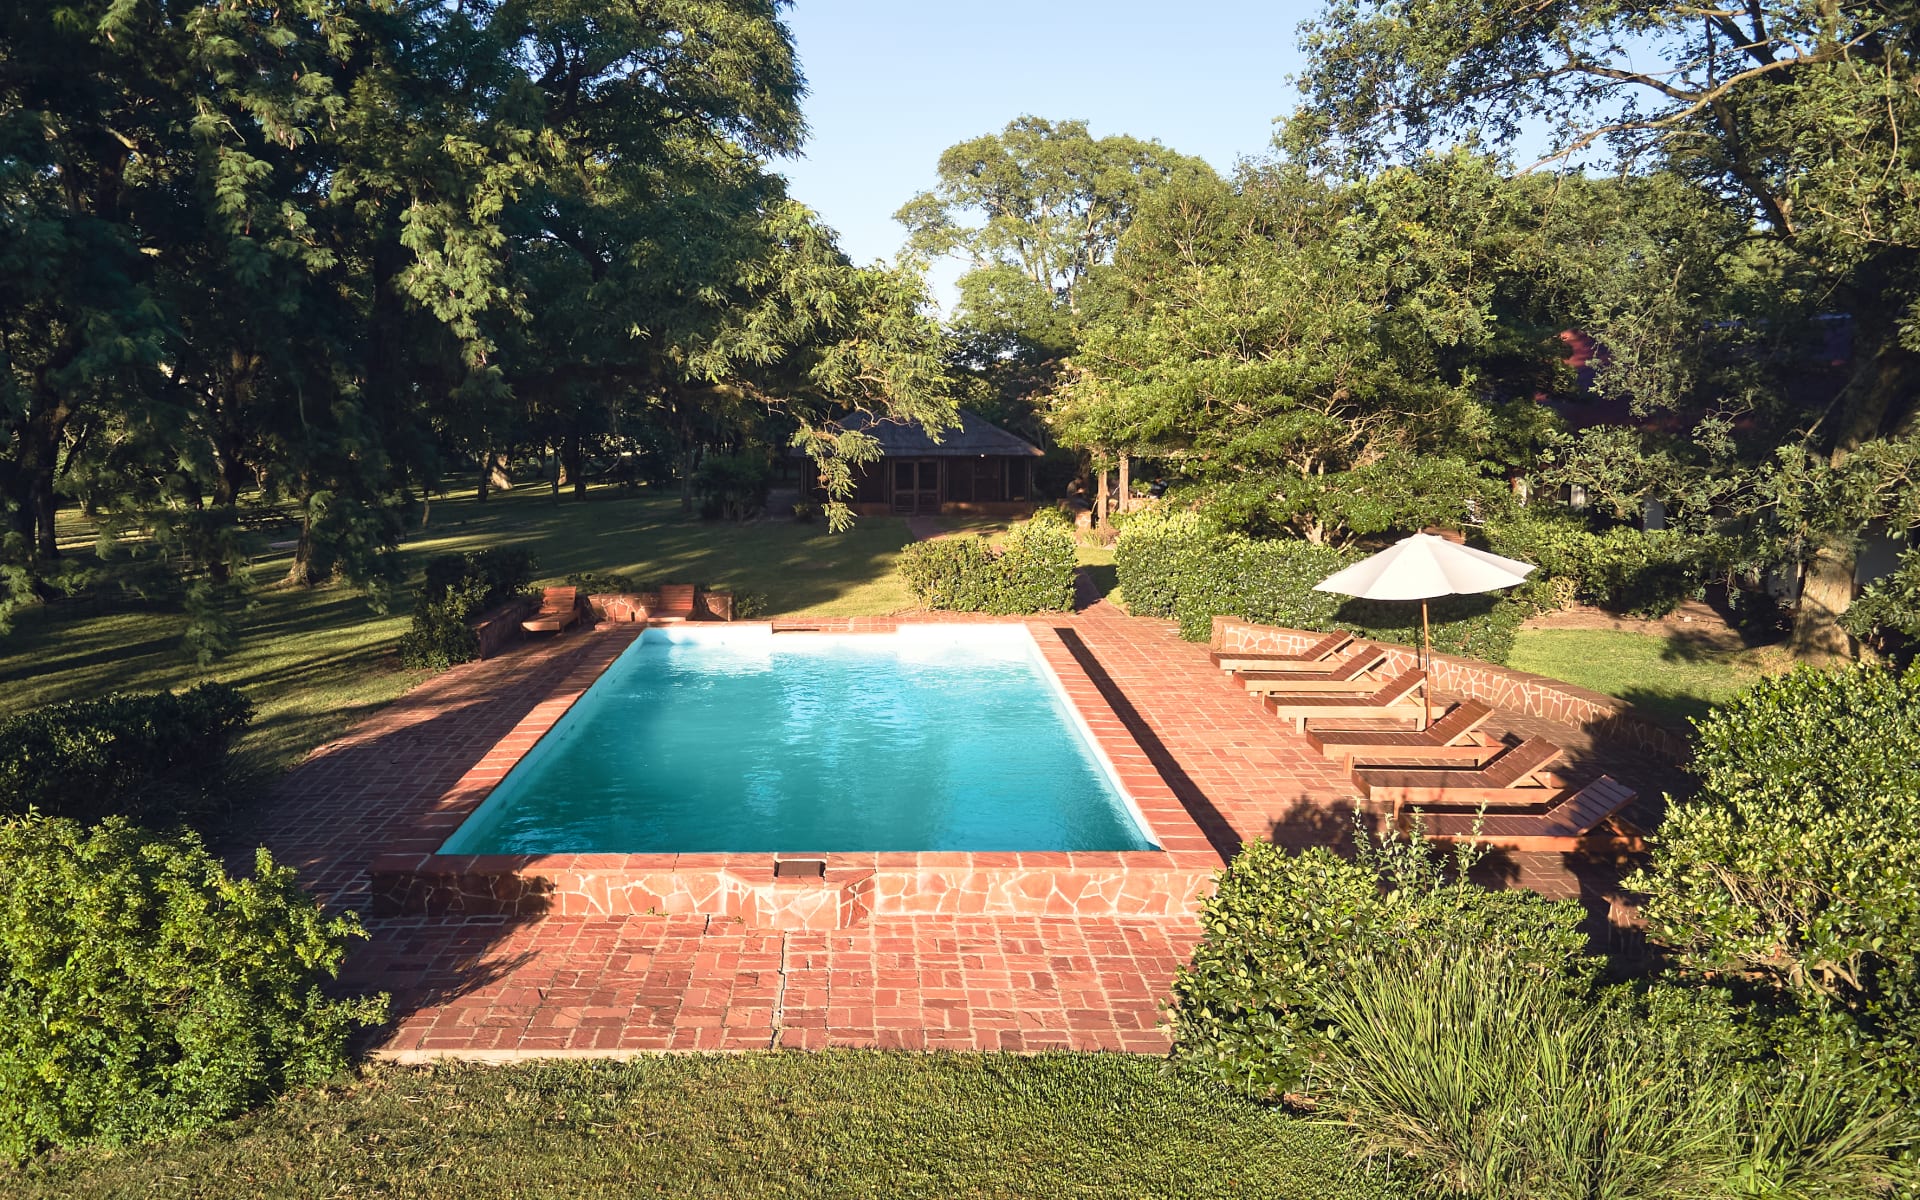 A rectangular pool sits within a red-brick deck, where sun loungers and white umbrellas stand.  